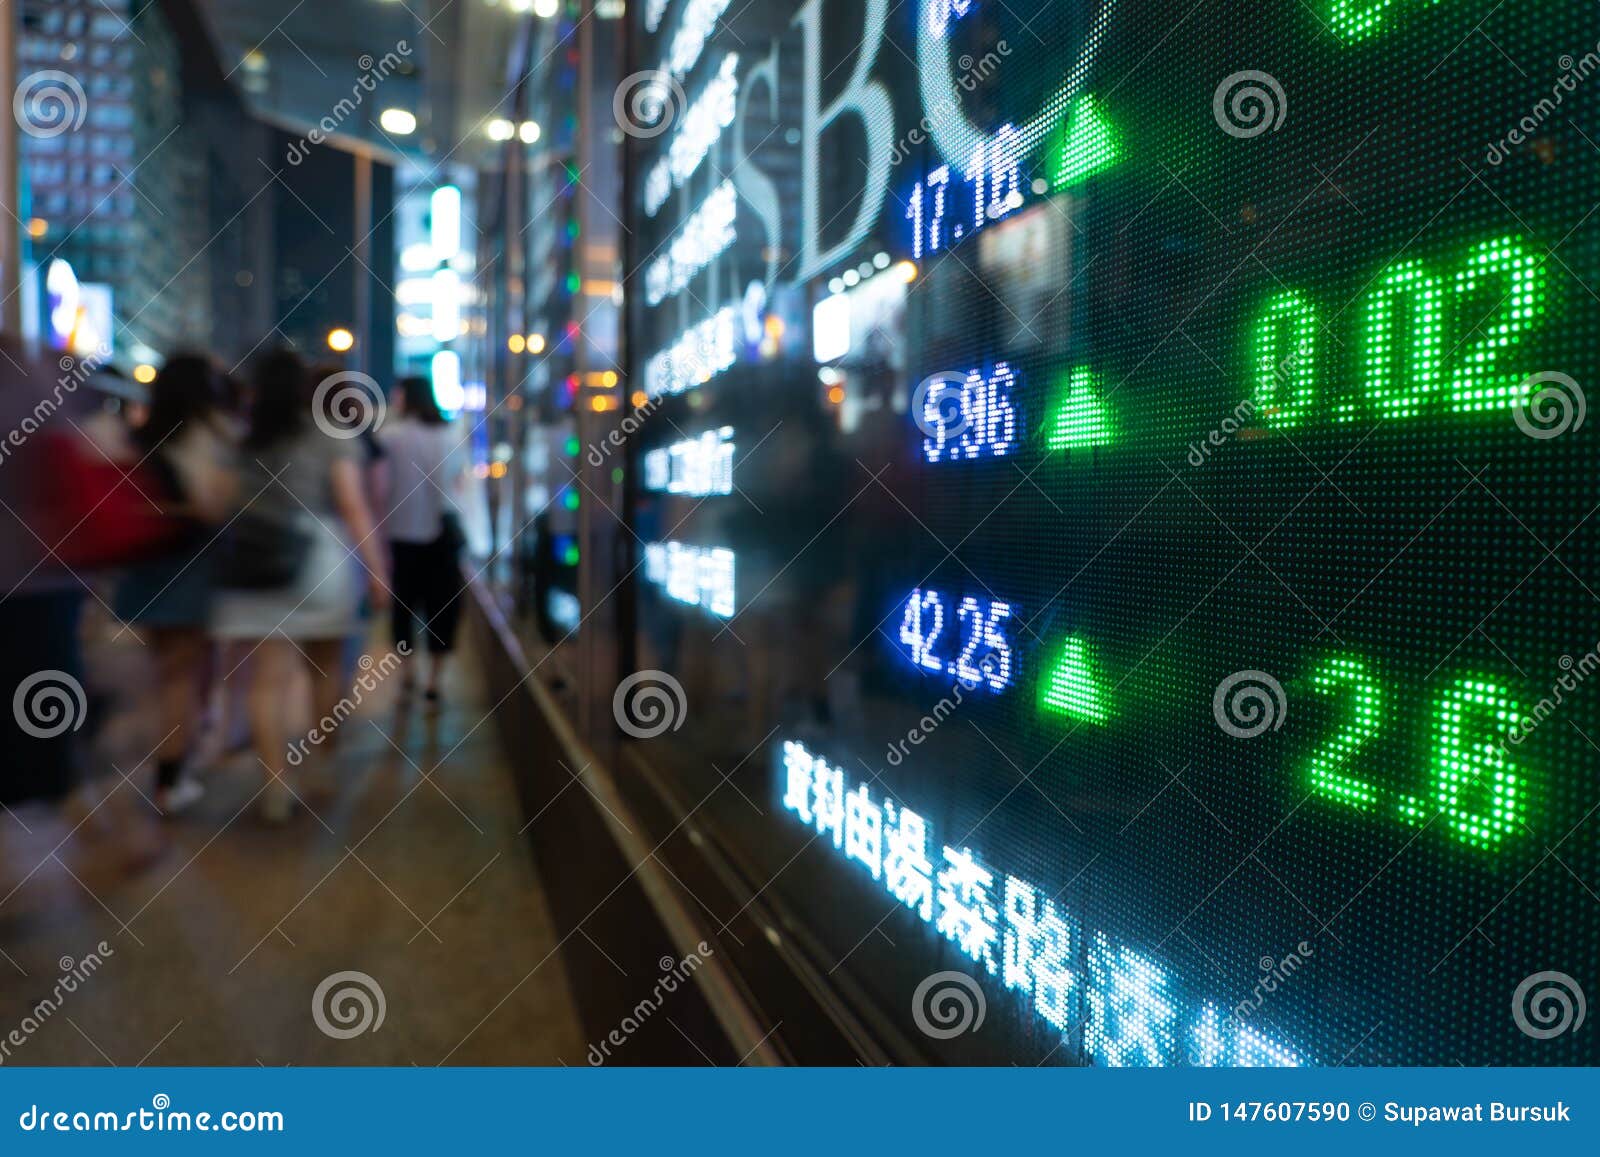 Ashley Furman Tick På daglig basis Financial Stock Exchange Market Display Screen Board on the Street and City  Light Reflection in Hong Kong Stock Photo - Image of financial, concept:  147607590